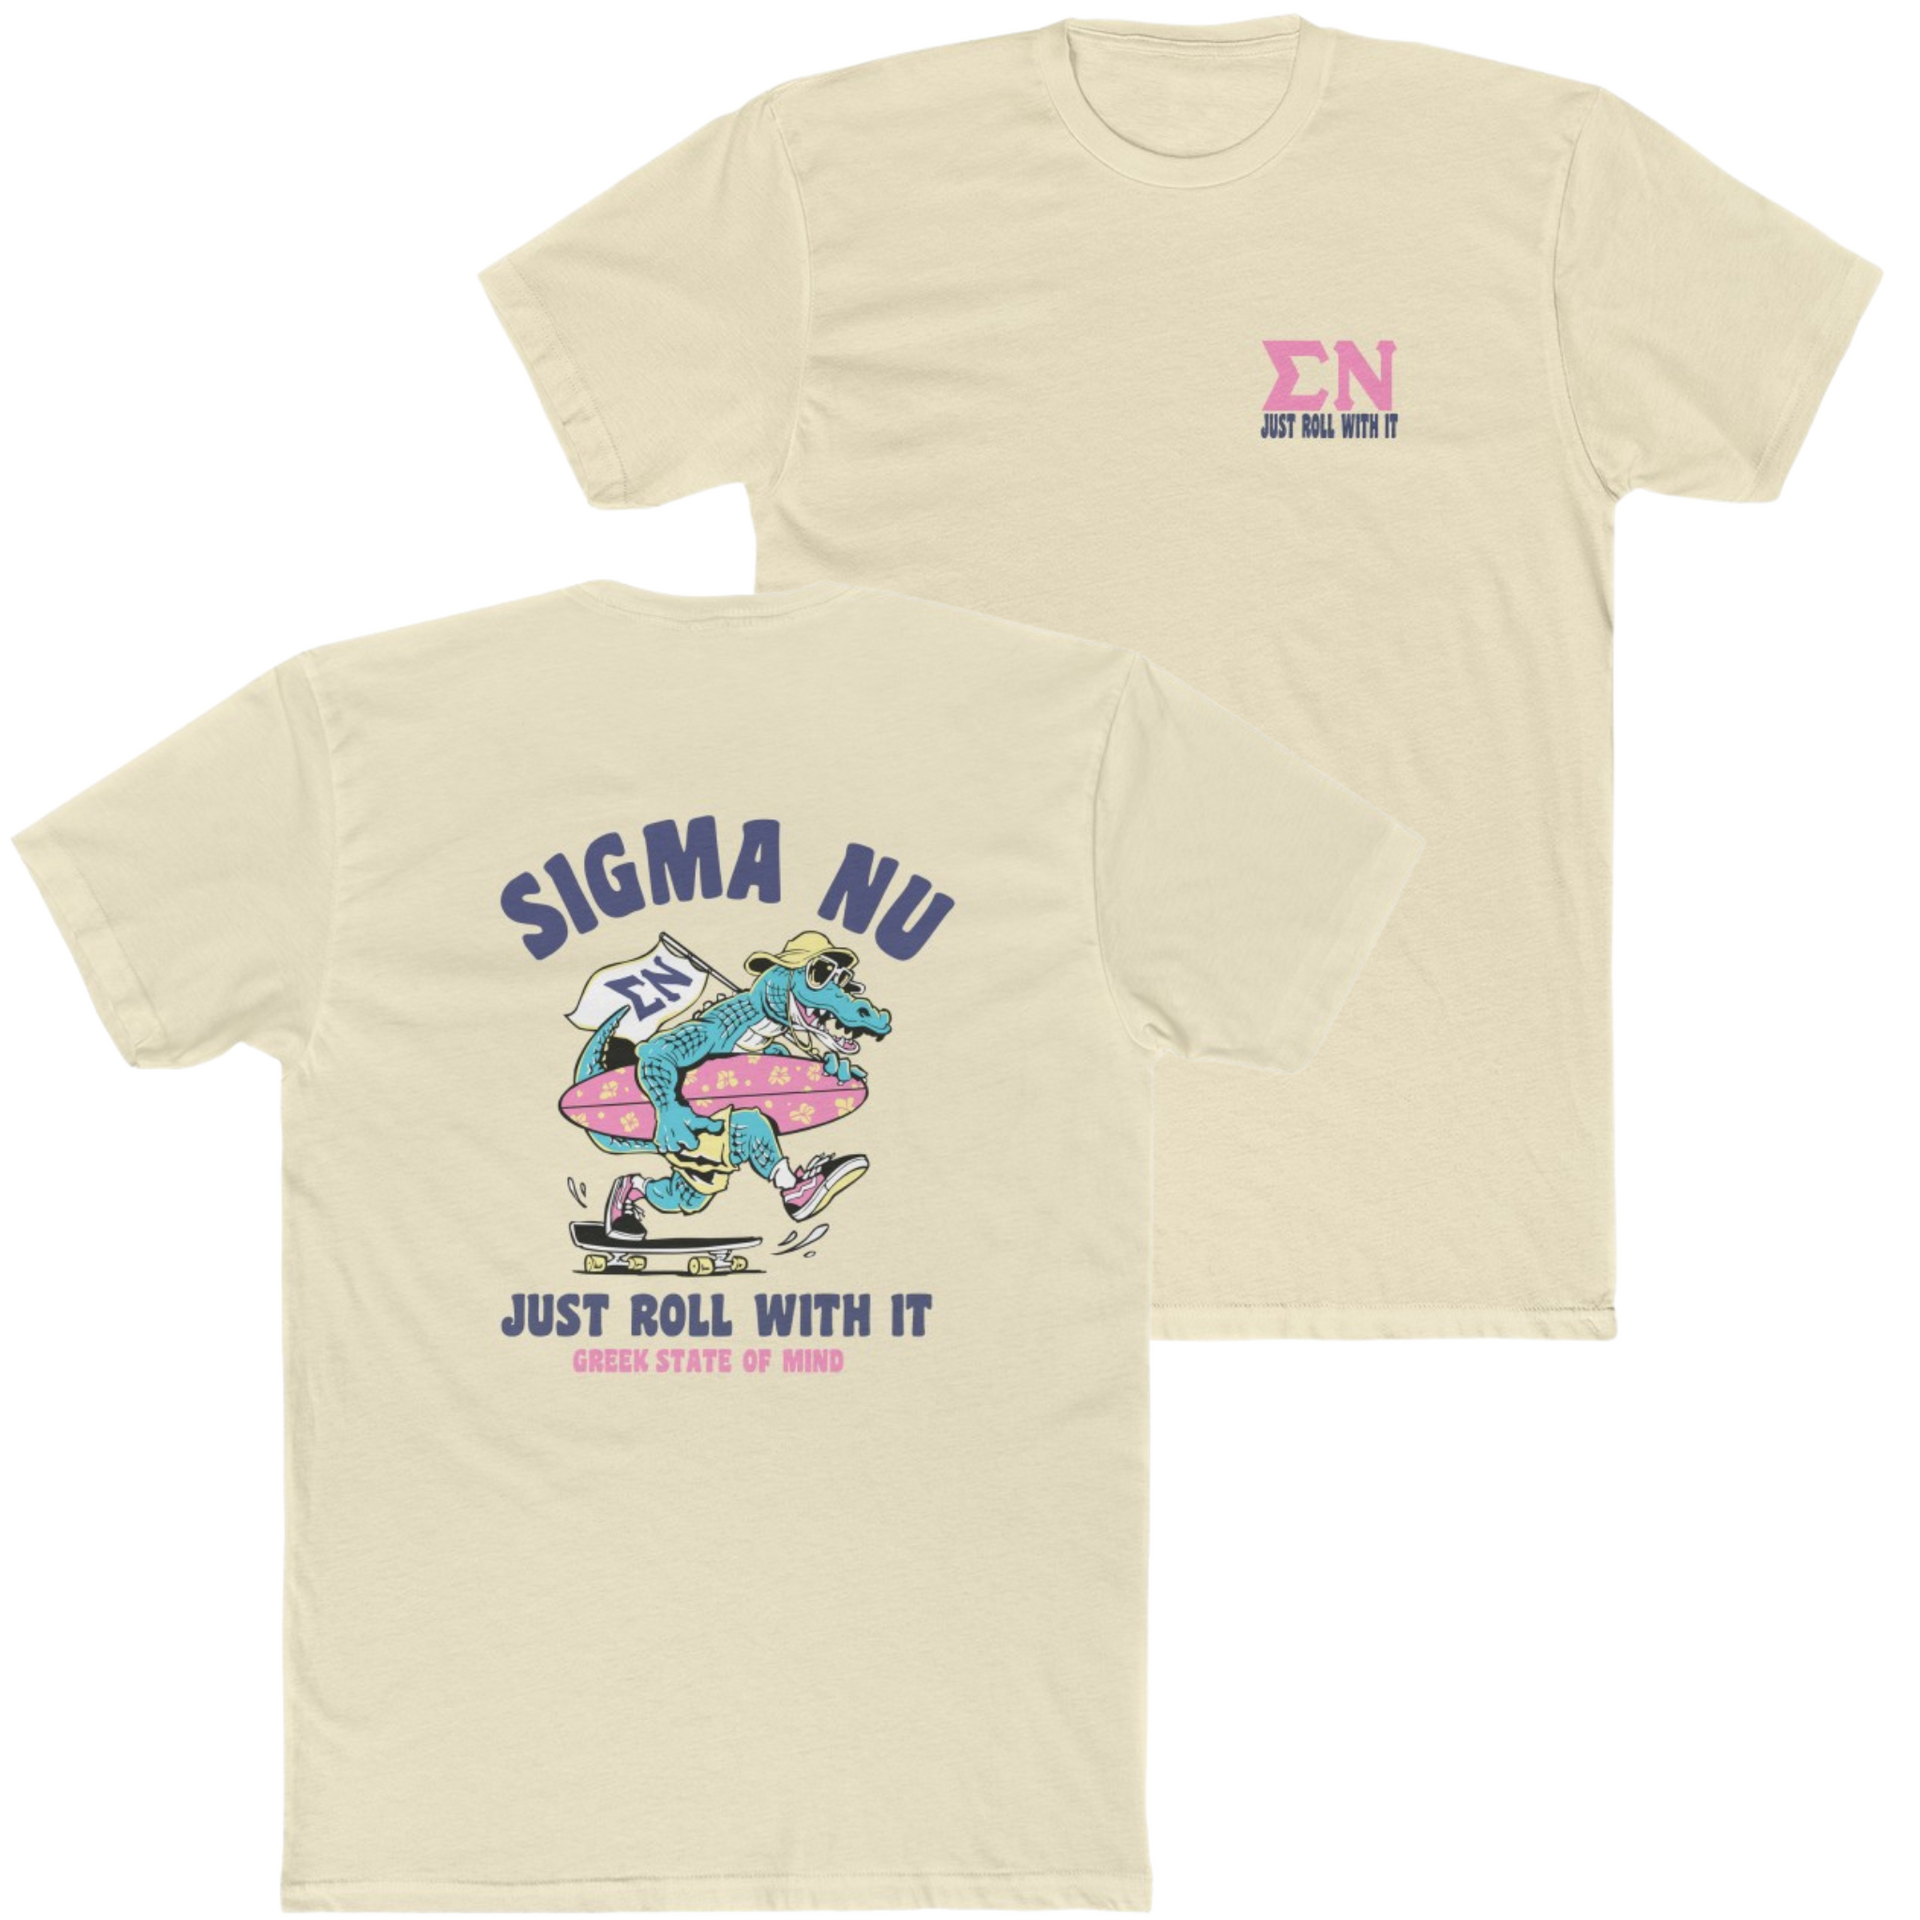 Sand Sigma Nu Graphic T-Shirt | Alligator Skater | Sigma Nu Clothing, Apparel and Merchandise